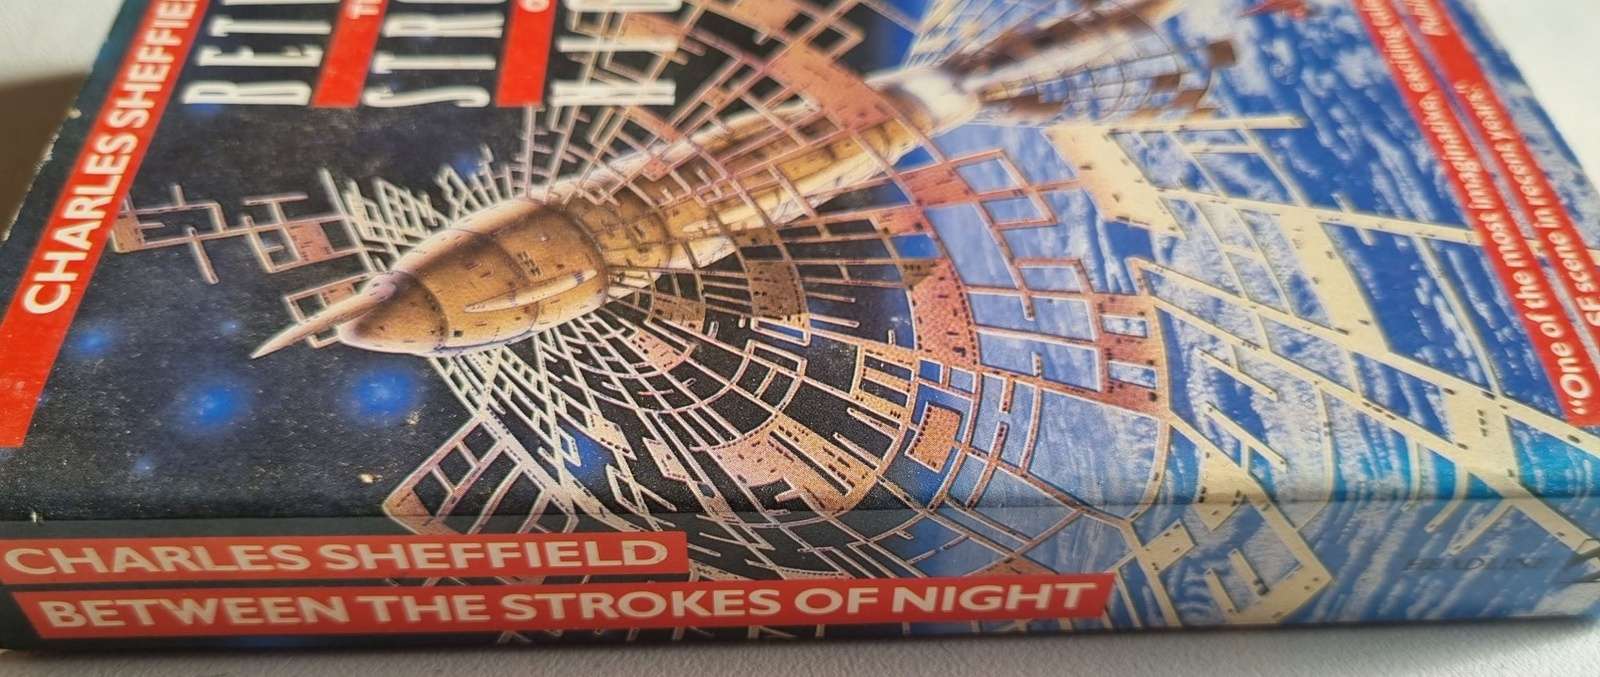 Between the Strokes of Night - Charles Sheffield